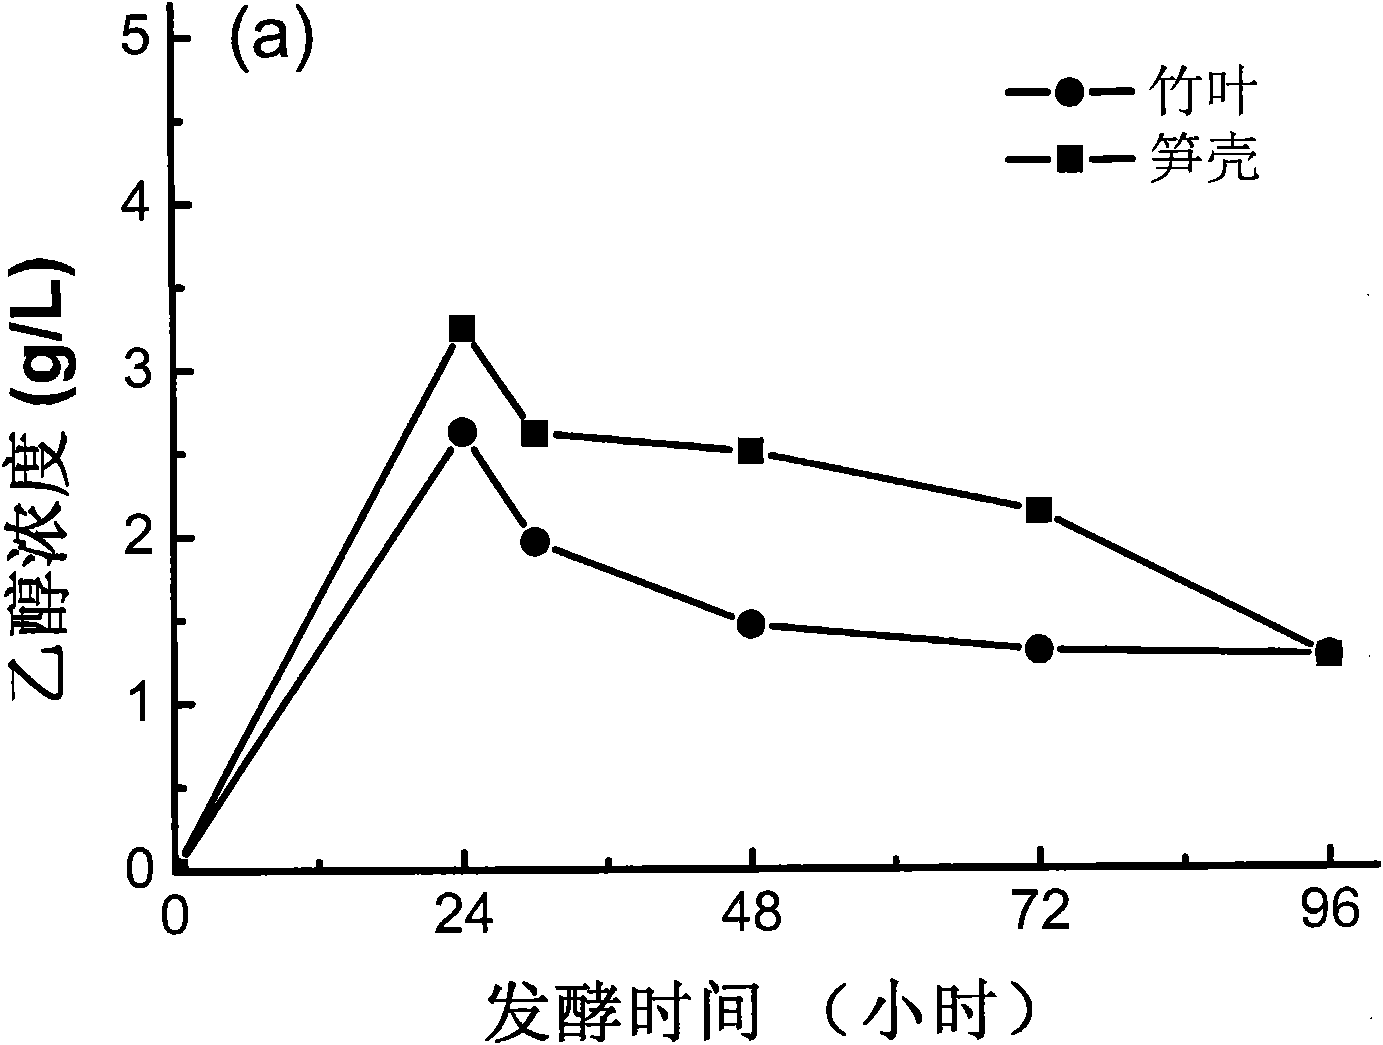 Process for producing fuel ethanol by utilizing bamboo biomass waste